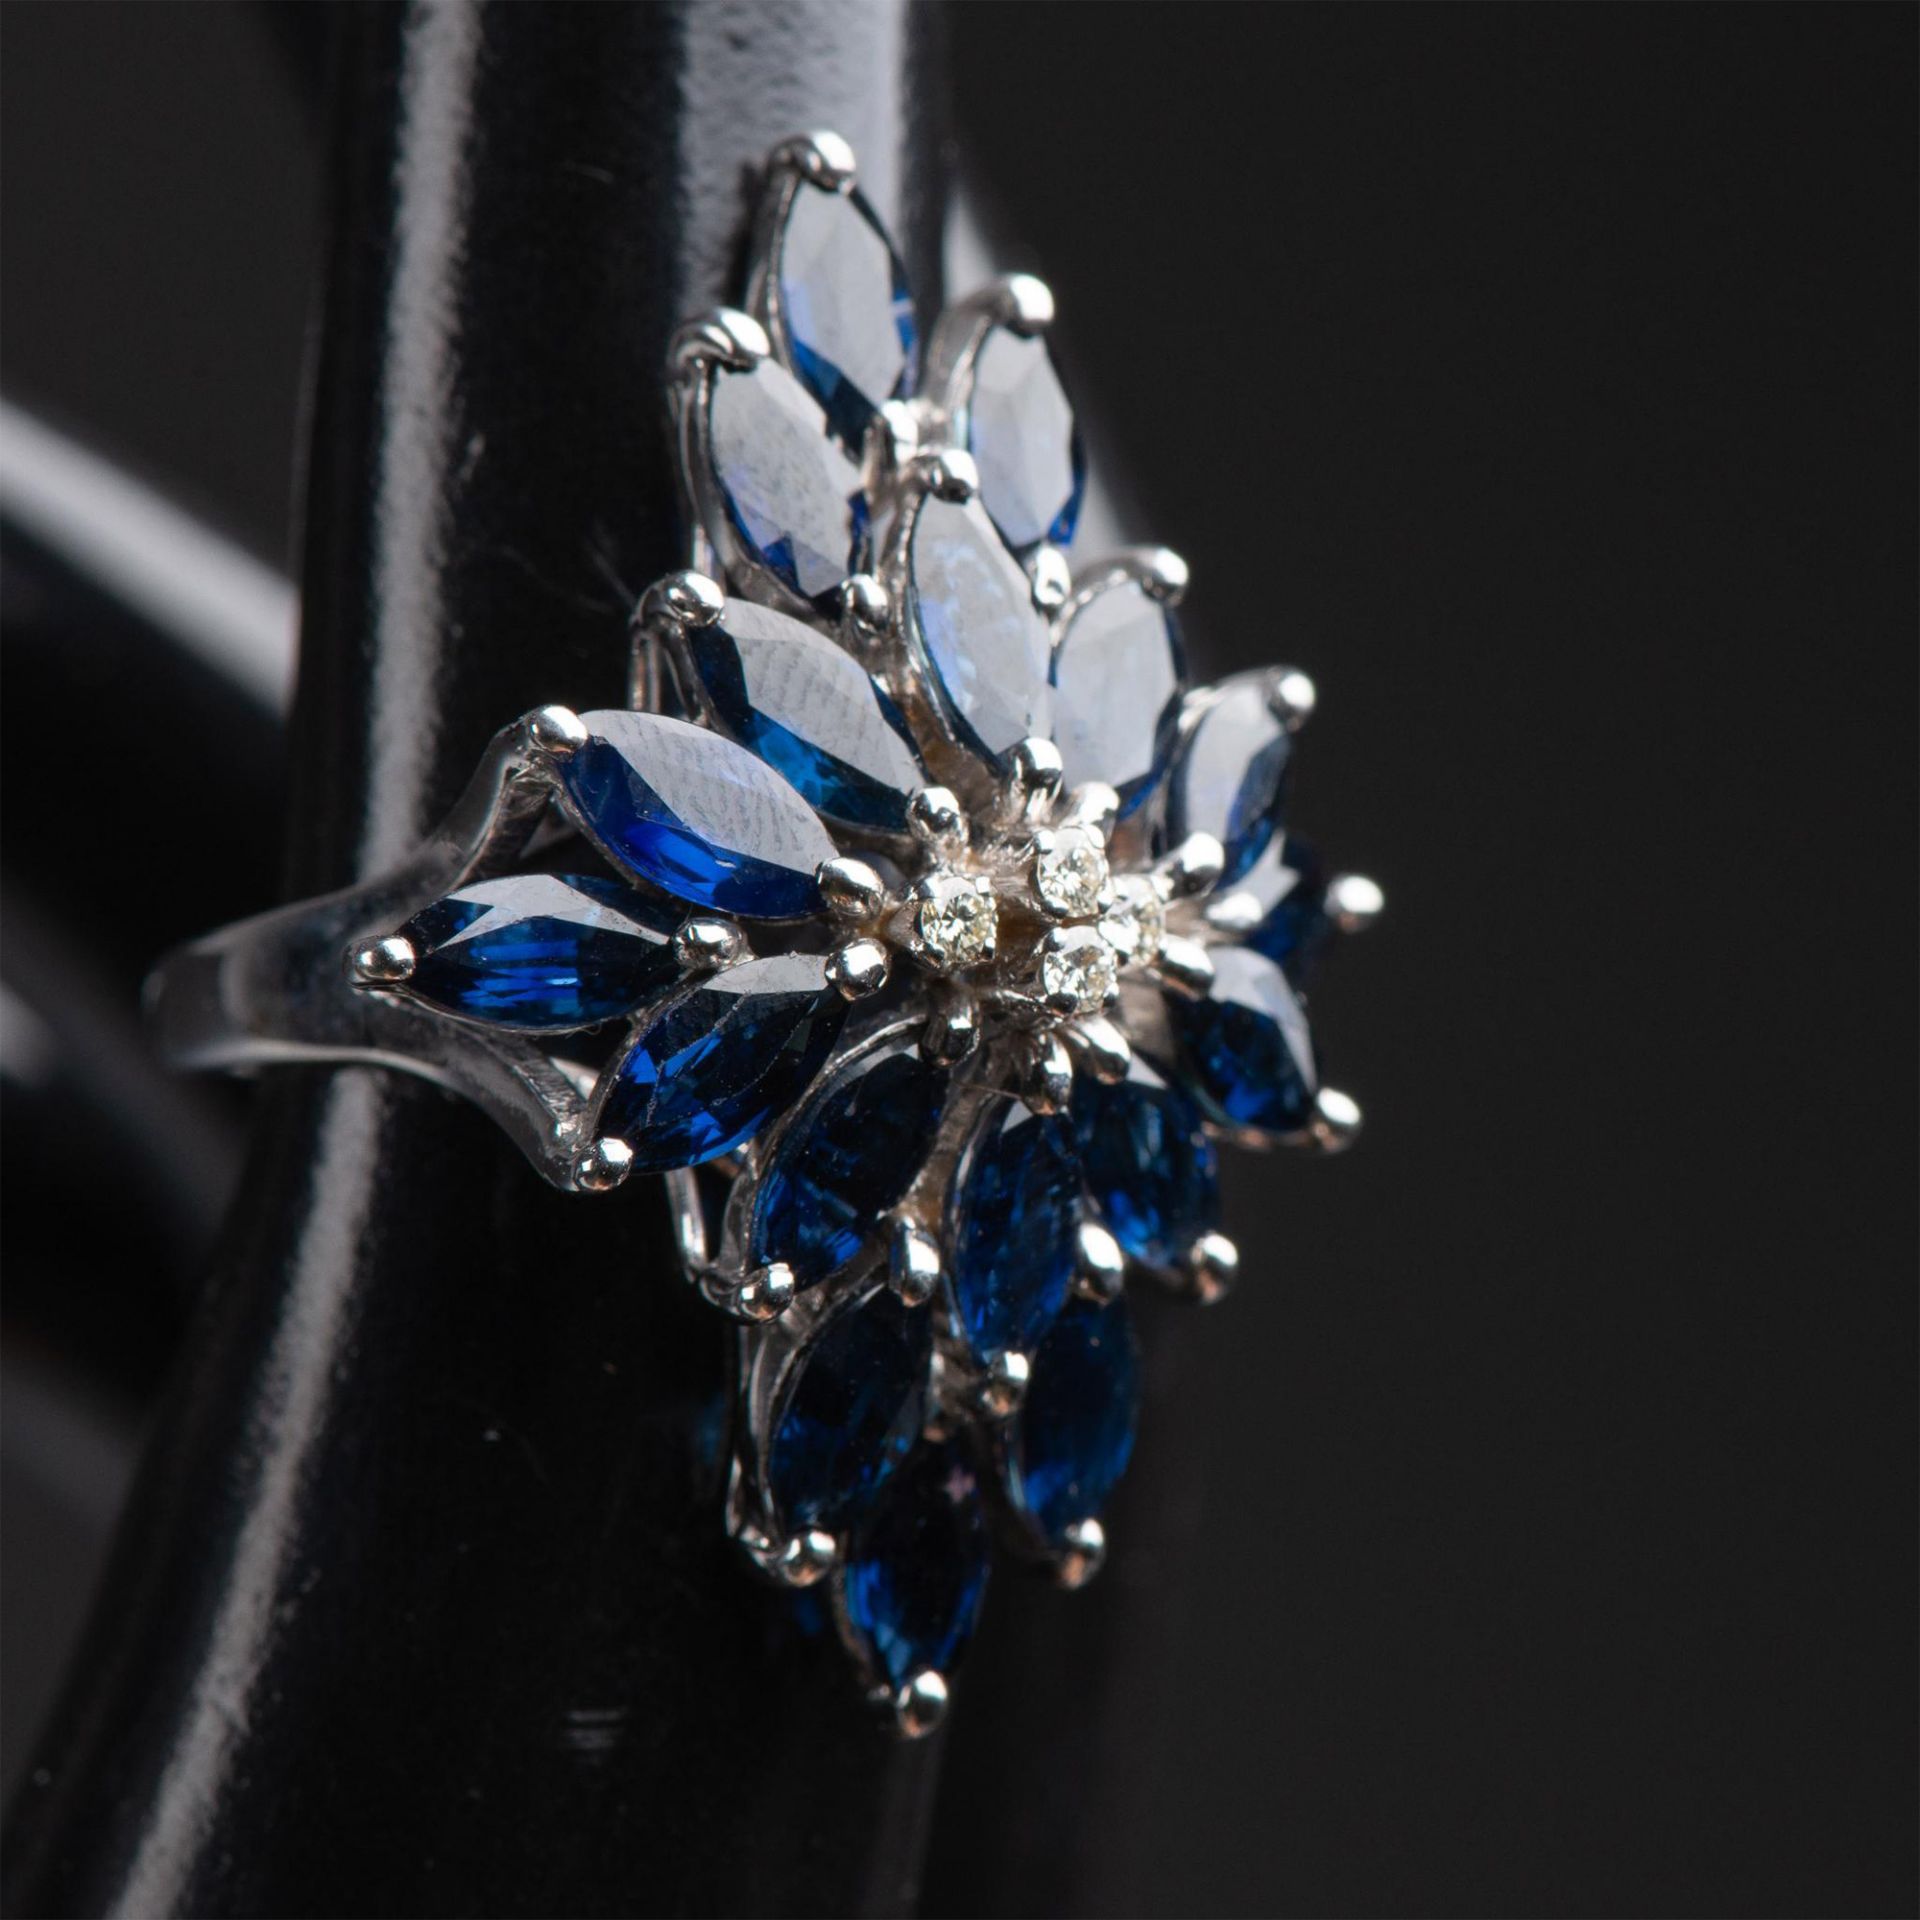 Fabulous 18k White Gold, Sapphire and Diamond Cocktail Ring - Image 6 of 7